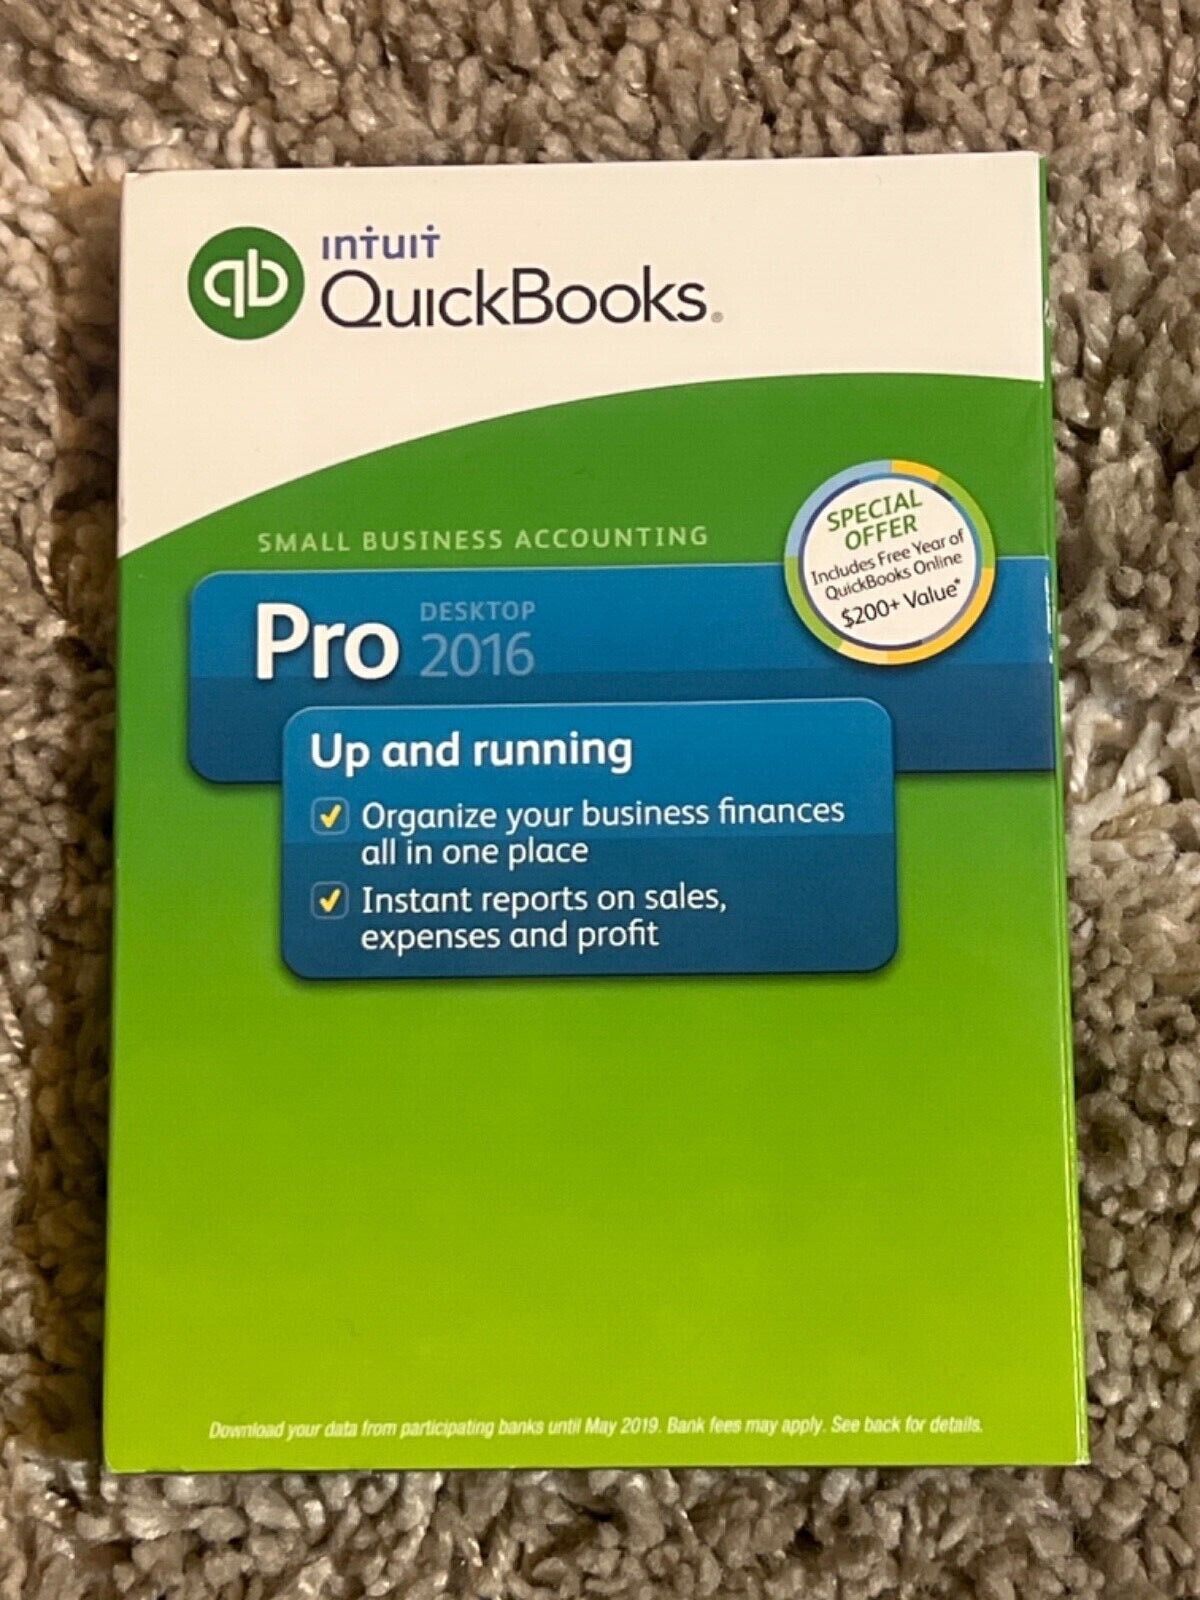 Intuit QuickBooks Pro 2016 Small Business Desktop Accounting Software Sealed